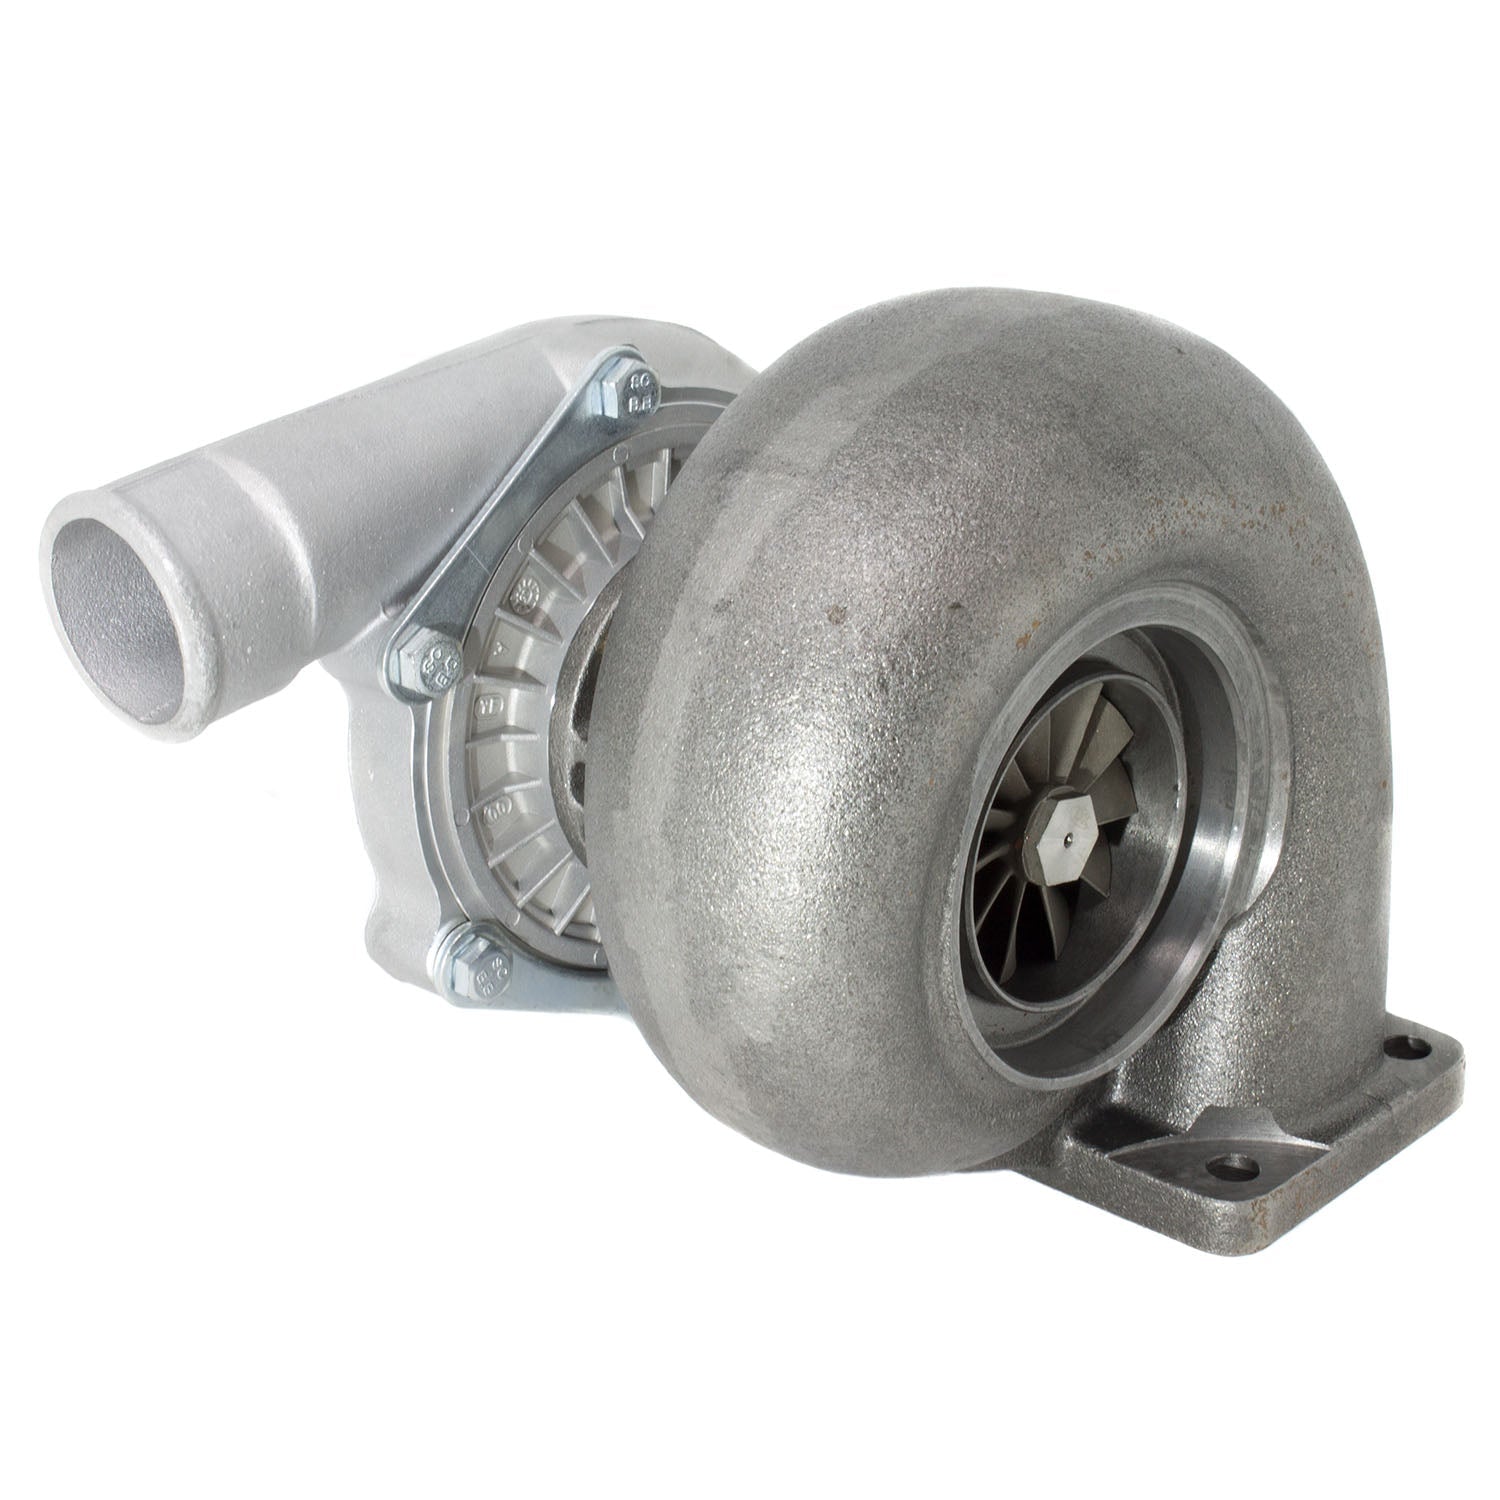 Duraforce A157336, Turbocharger For Case